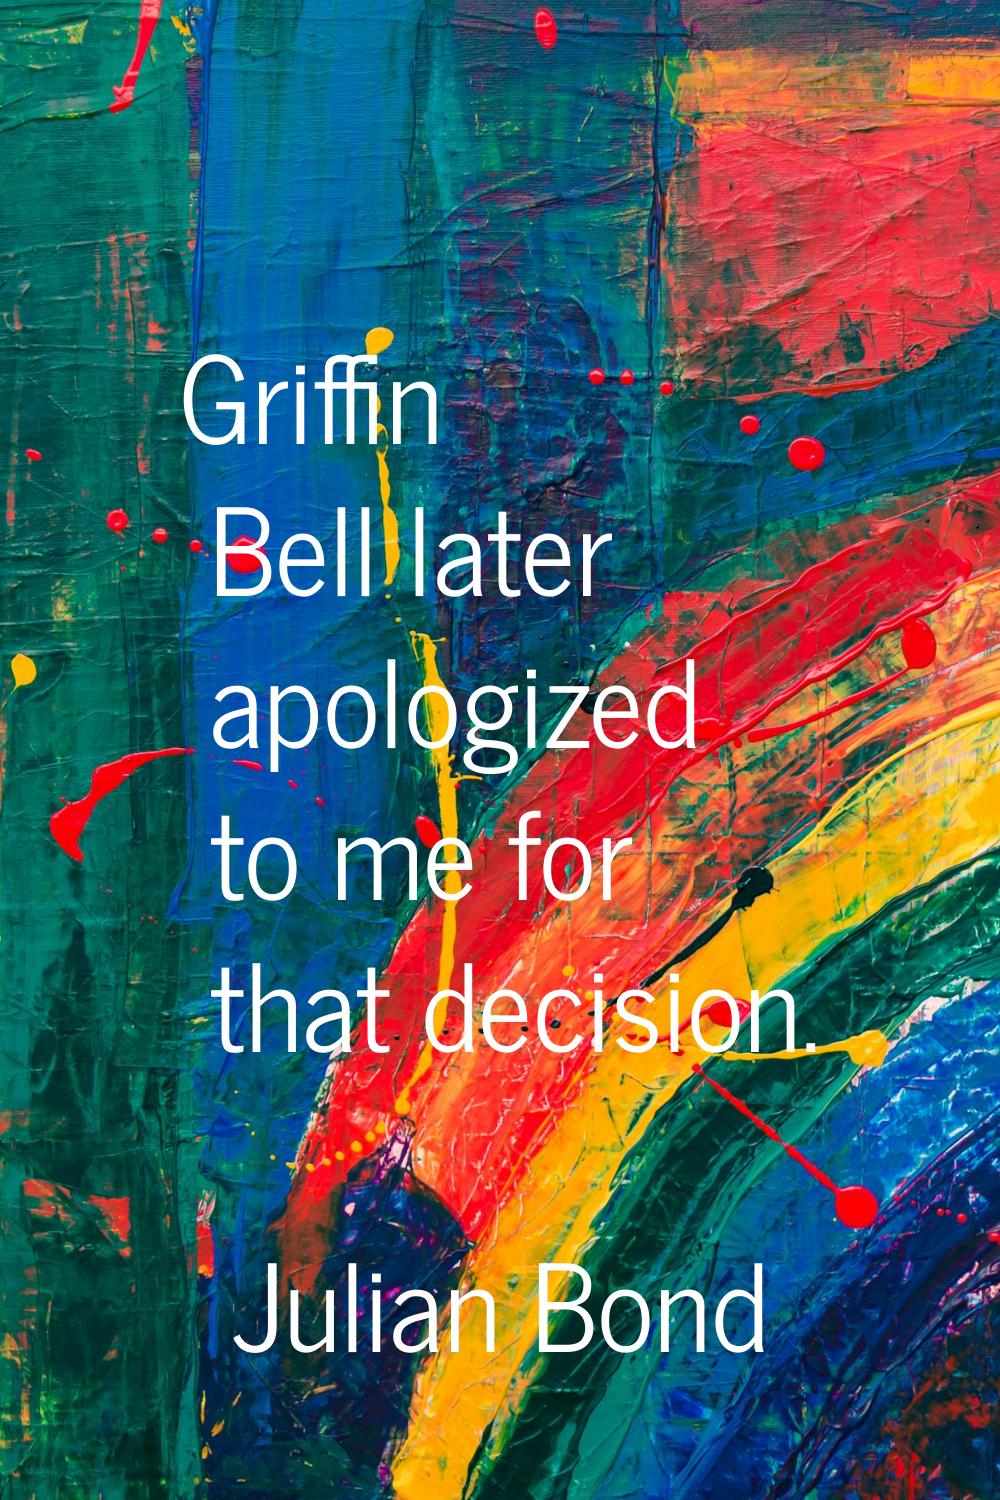 Griffin Bell later apologized to me for that decision.